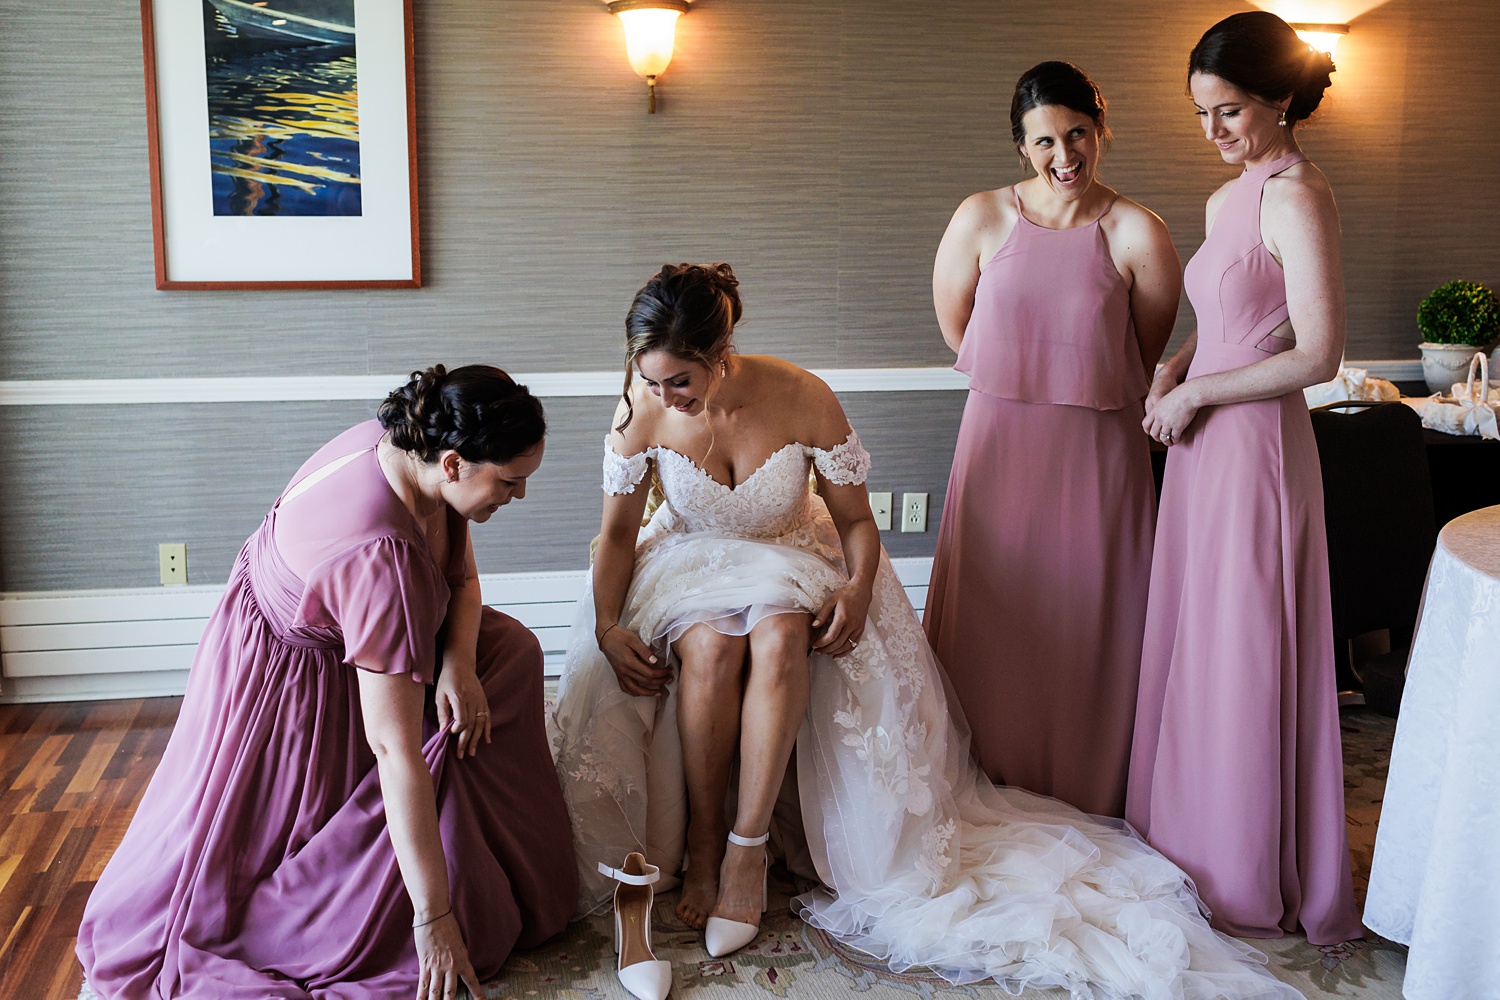 The bridesmaids help the bride into her wedding shoes